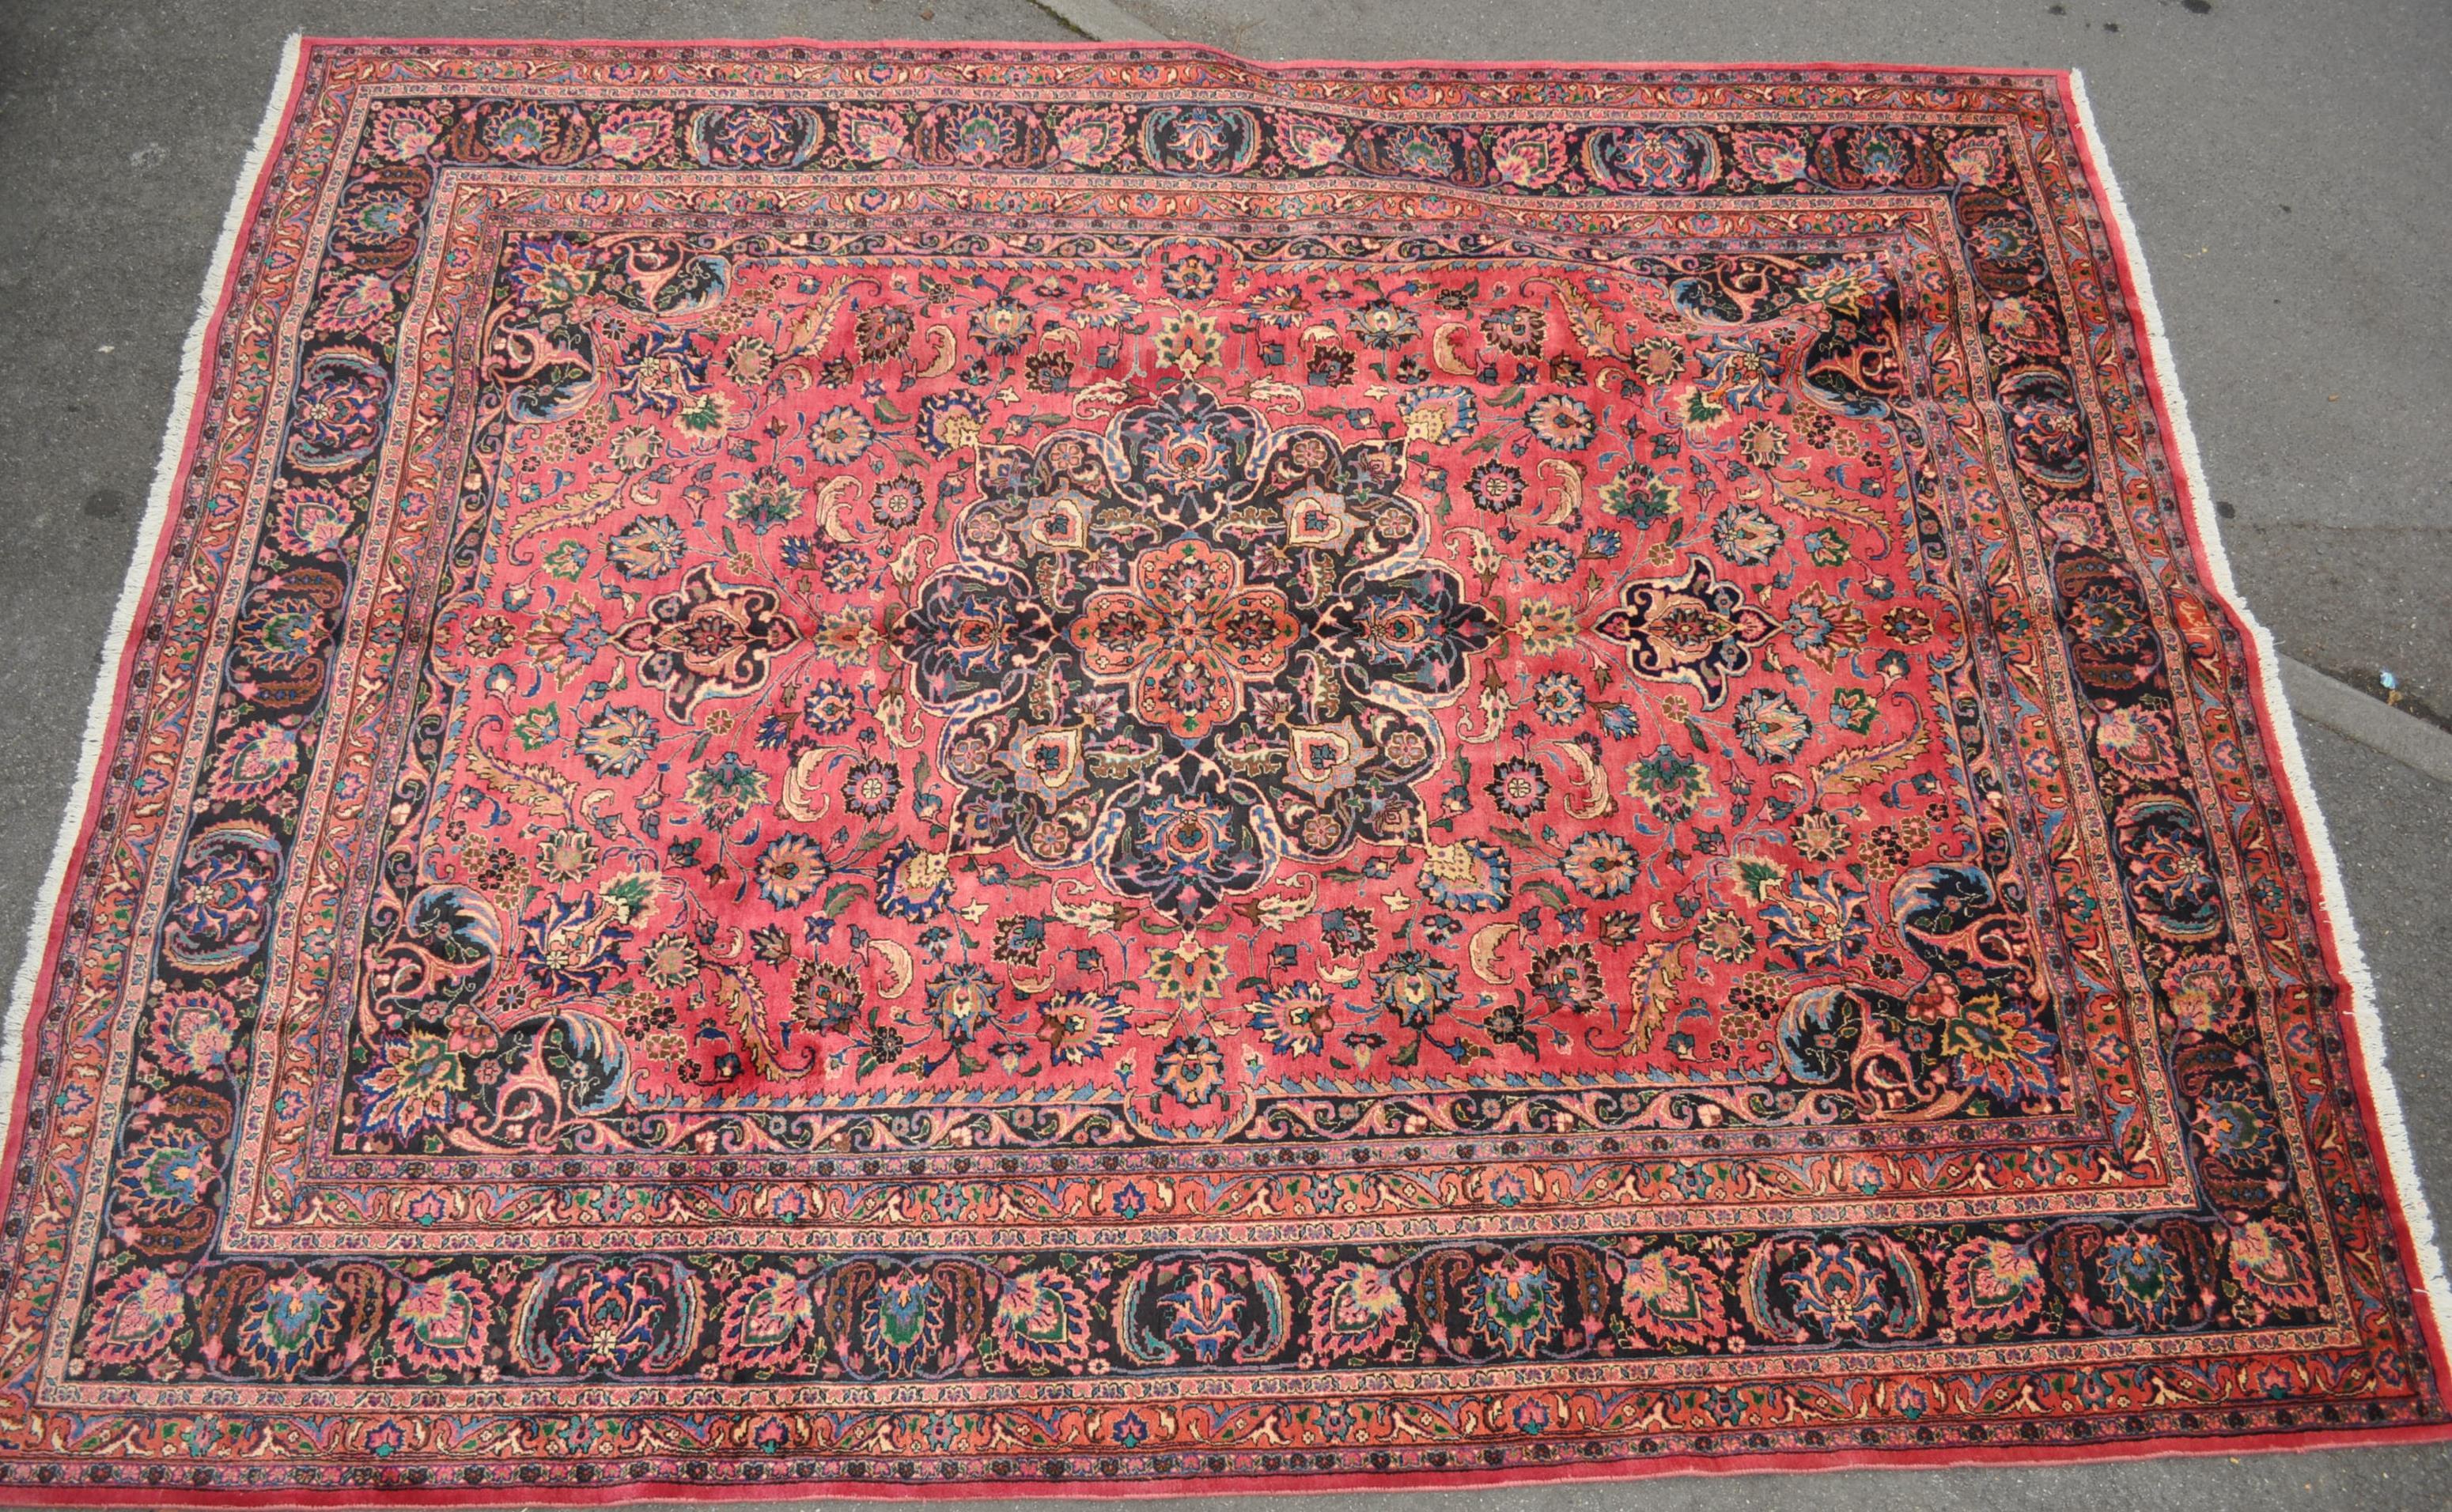 WOOL ON COTTON PERSIAN ISLAMIC SIGNED MESHED CARPET